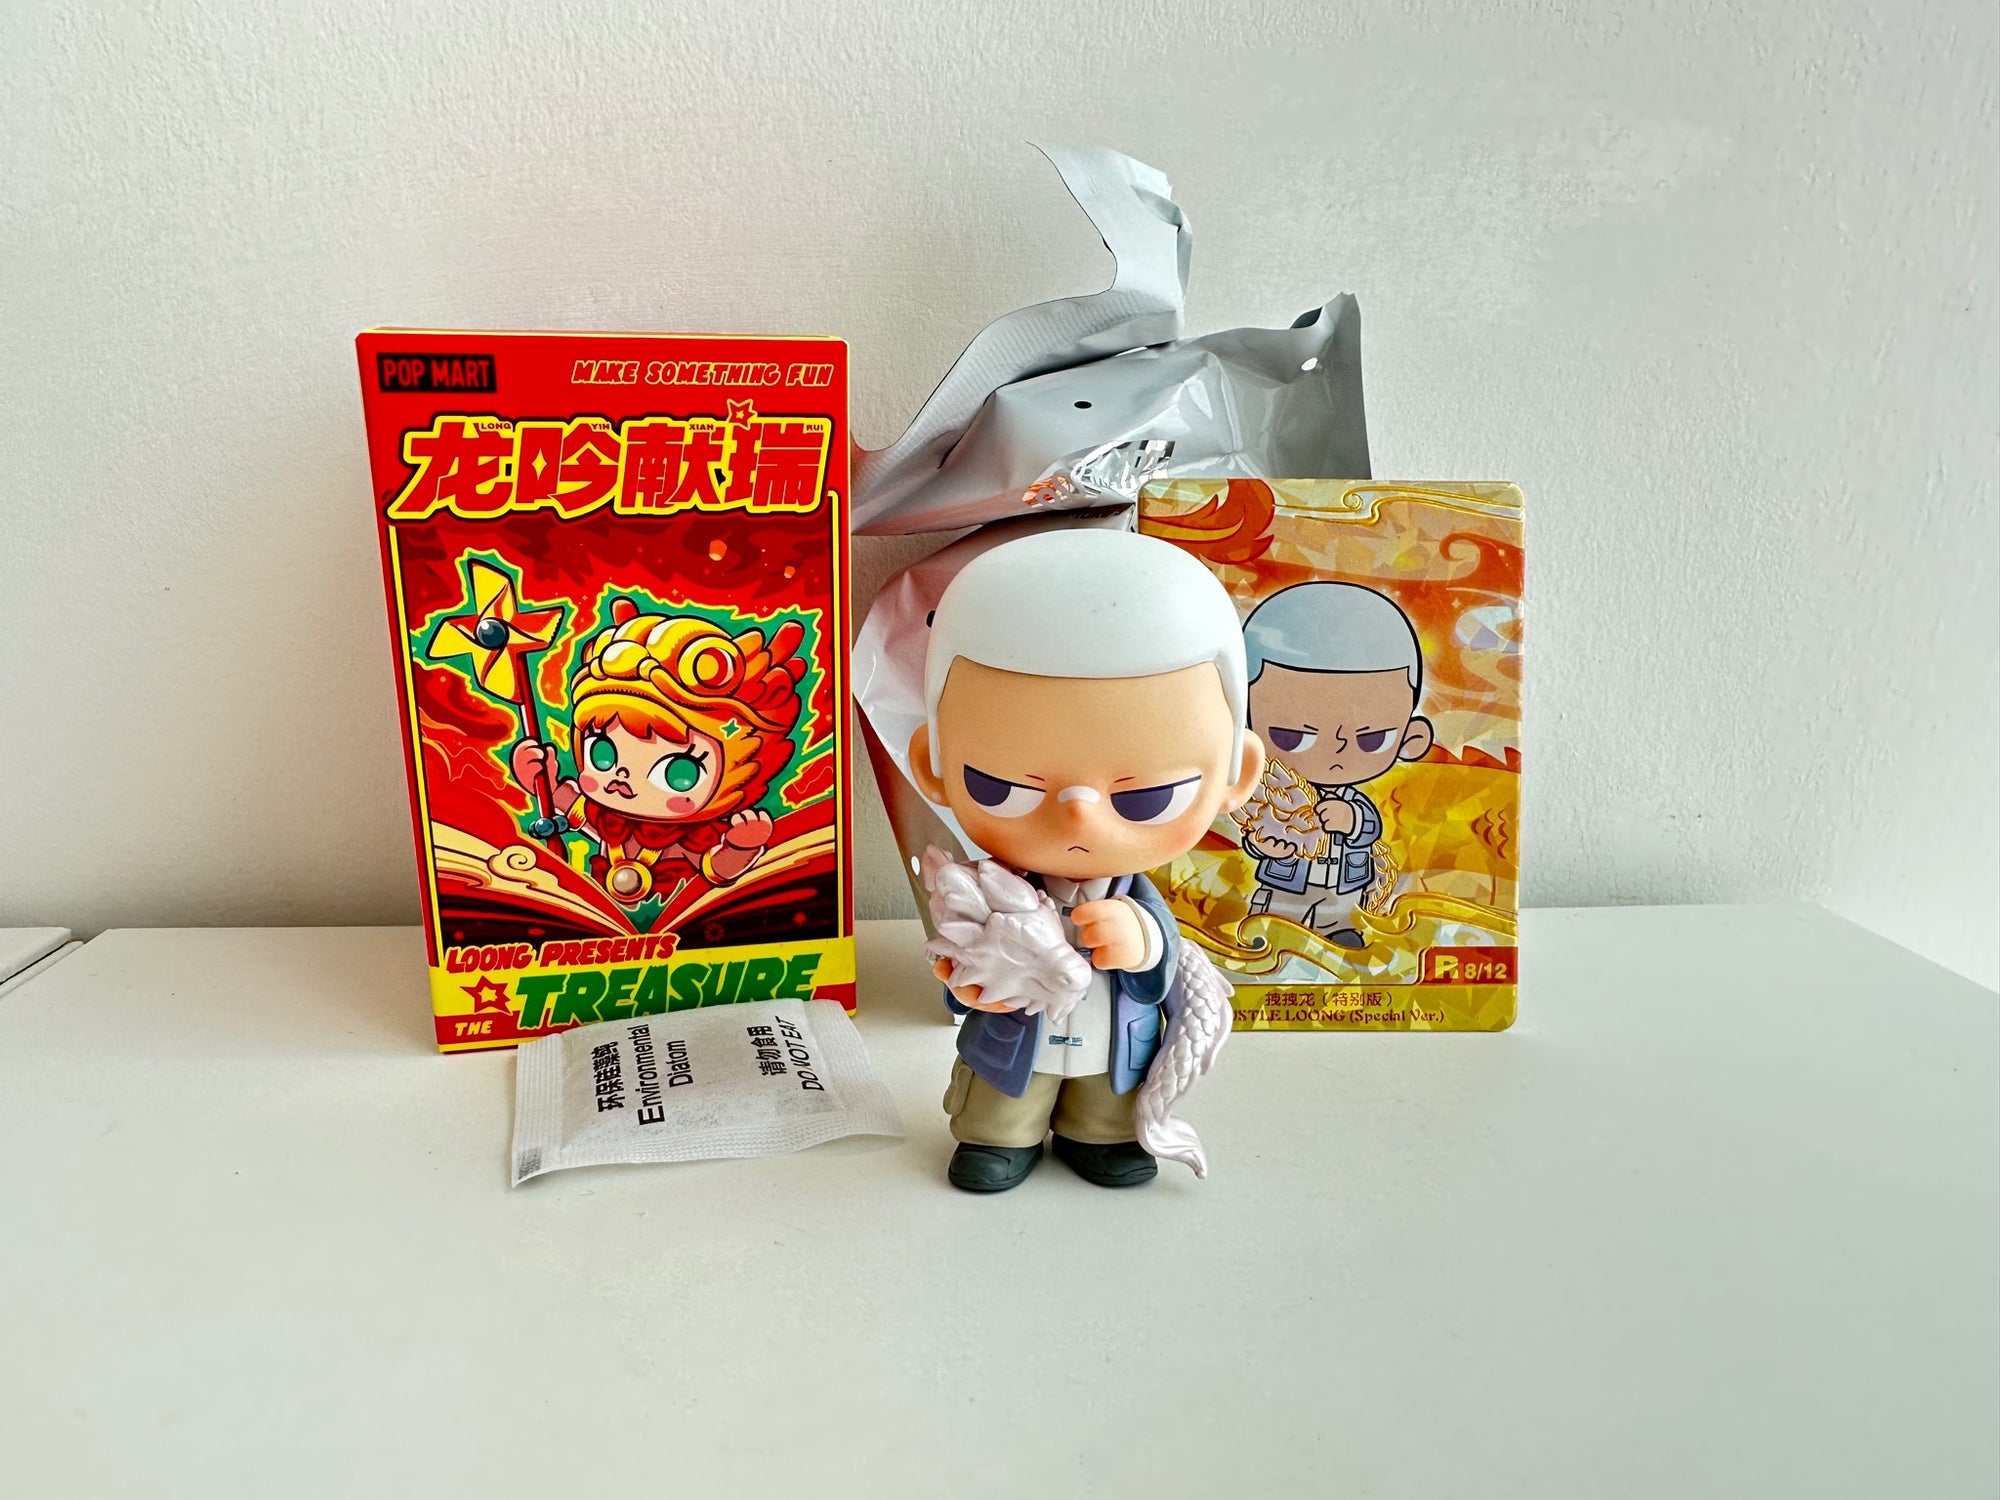 (KUBO) HUSTLE LOONG (Special Version) - Loong Presents the Treasure Series Figures by POP MART - 1